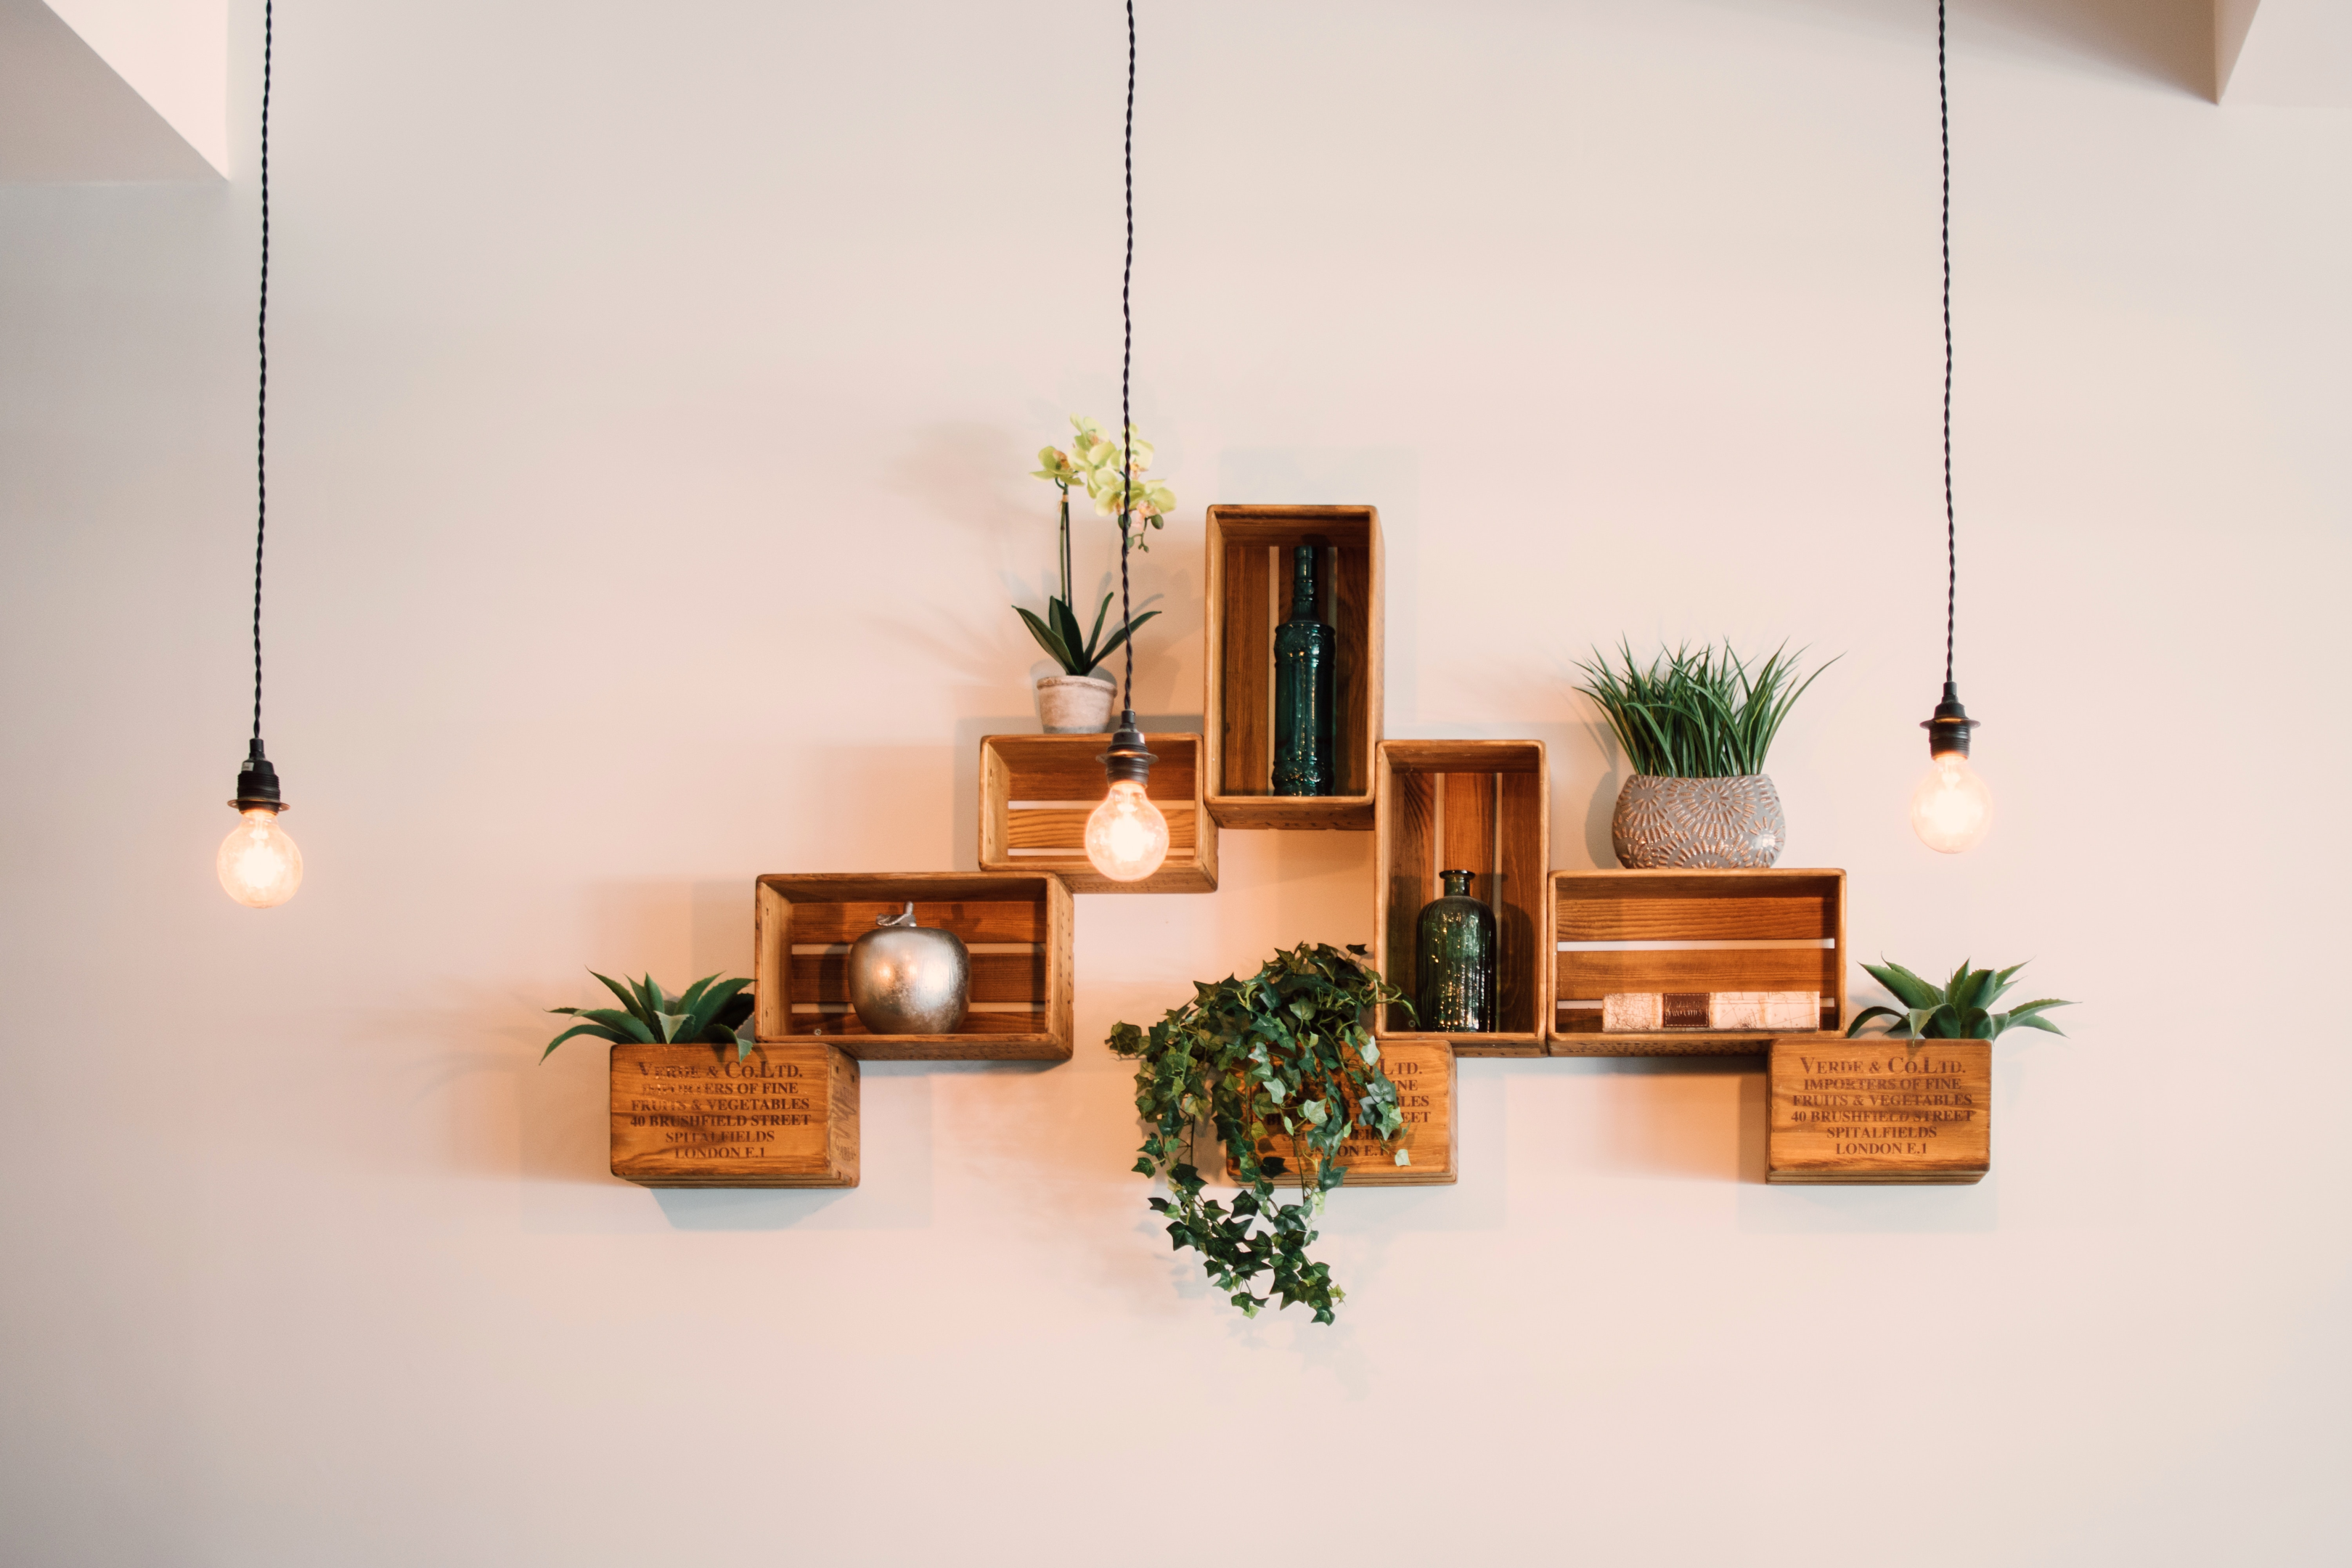 crate wall hanging with plants and hanging bulbs